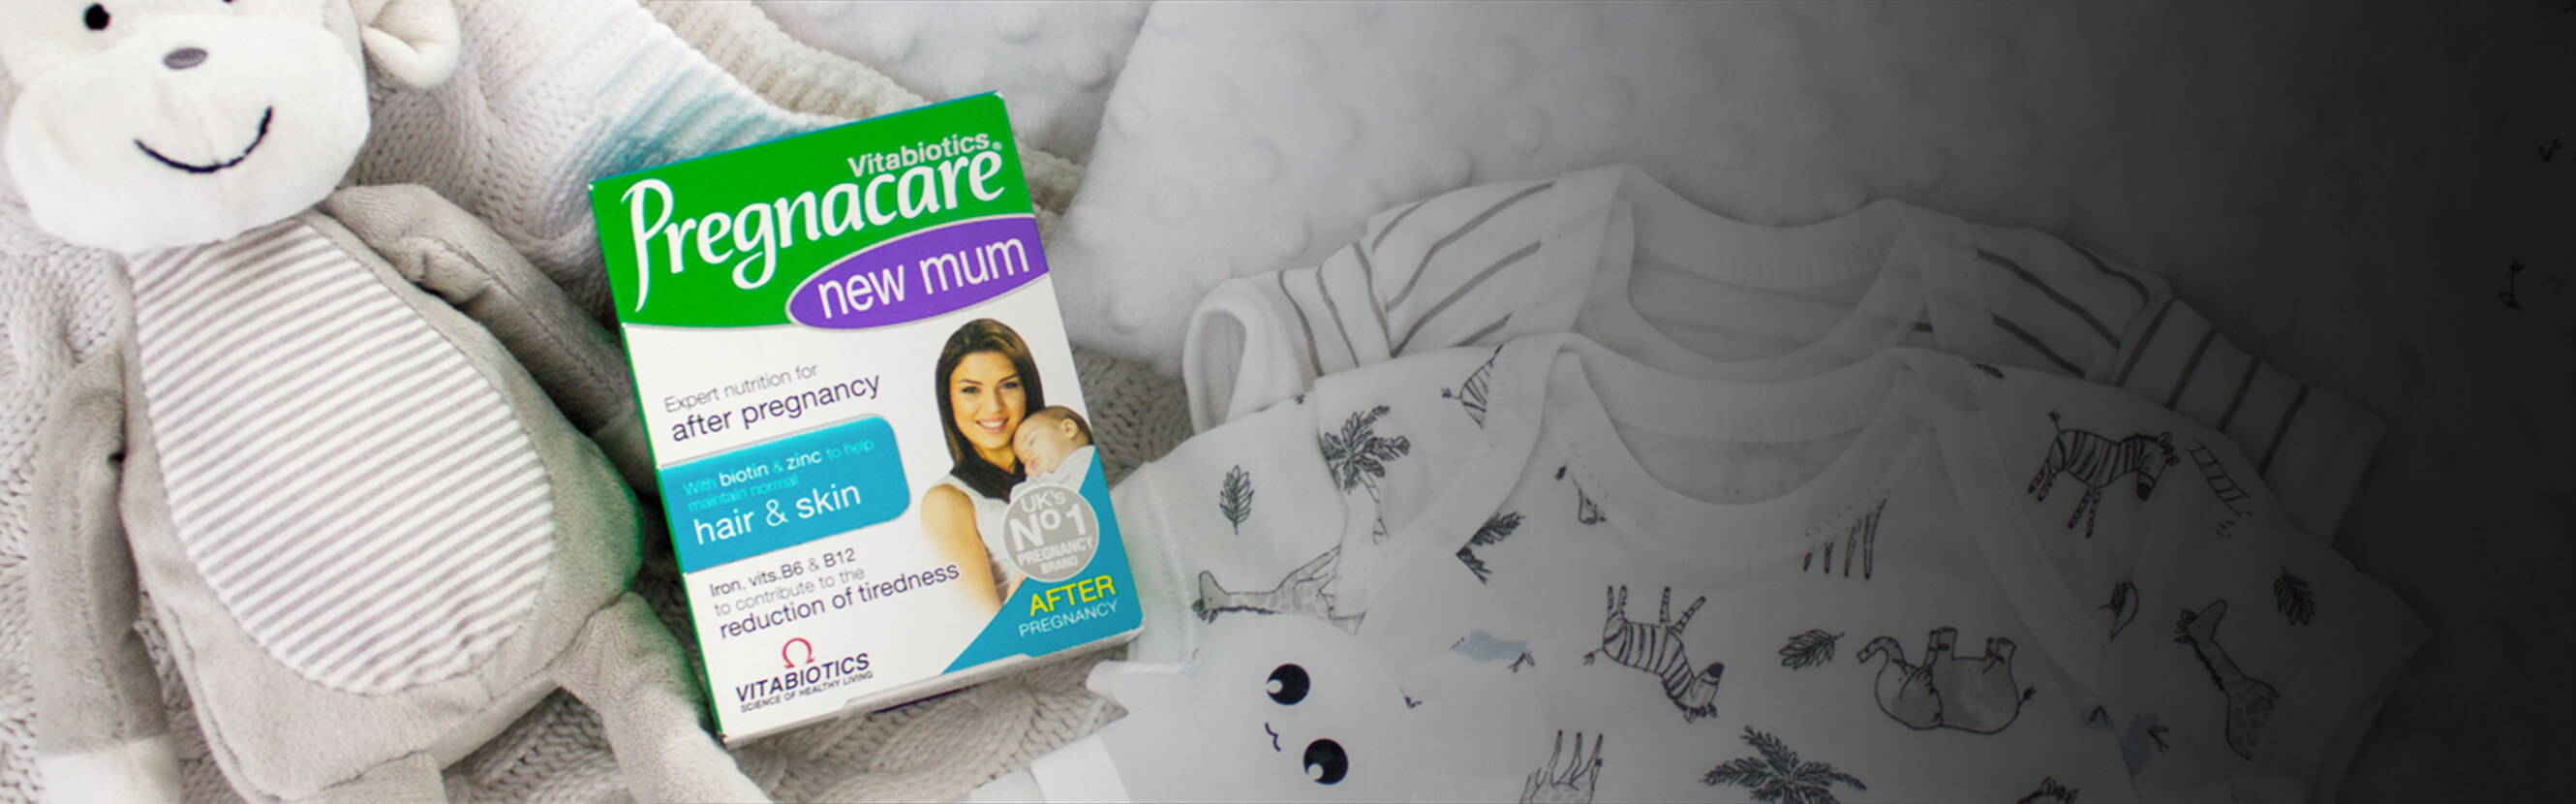  Being a new mum is exciting and exhausting at the same time. And with a little one to look after, taking care of your own health is more important than ever. Pregnacare New Mum is gently formulated based on how your body changes after pregnancy and childbirth, with specific nutrients to help maintain normal energy release, skin health and hair health.  